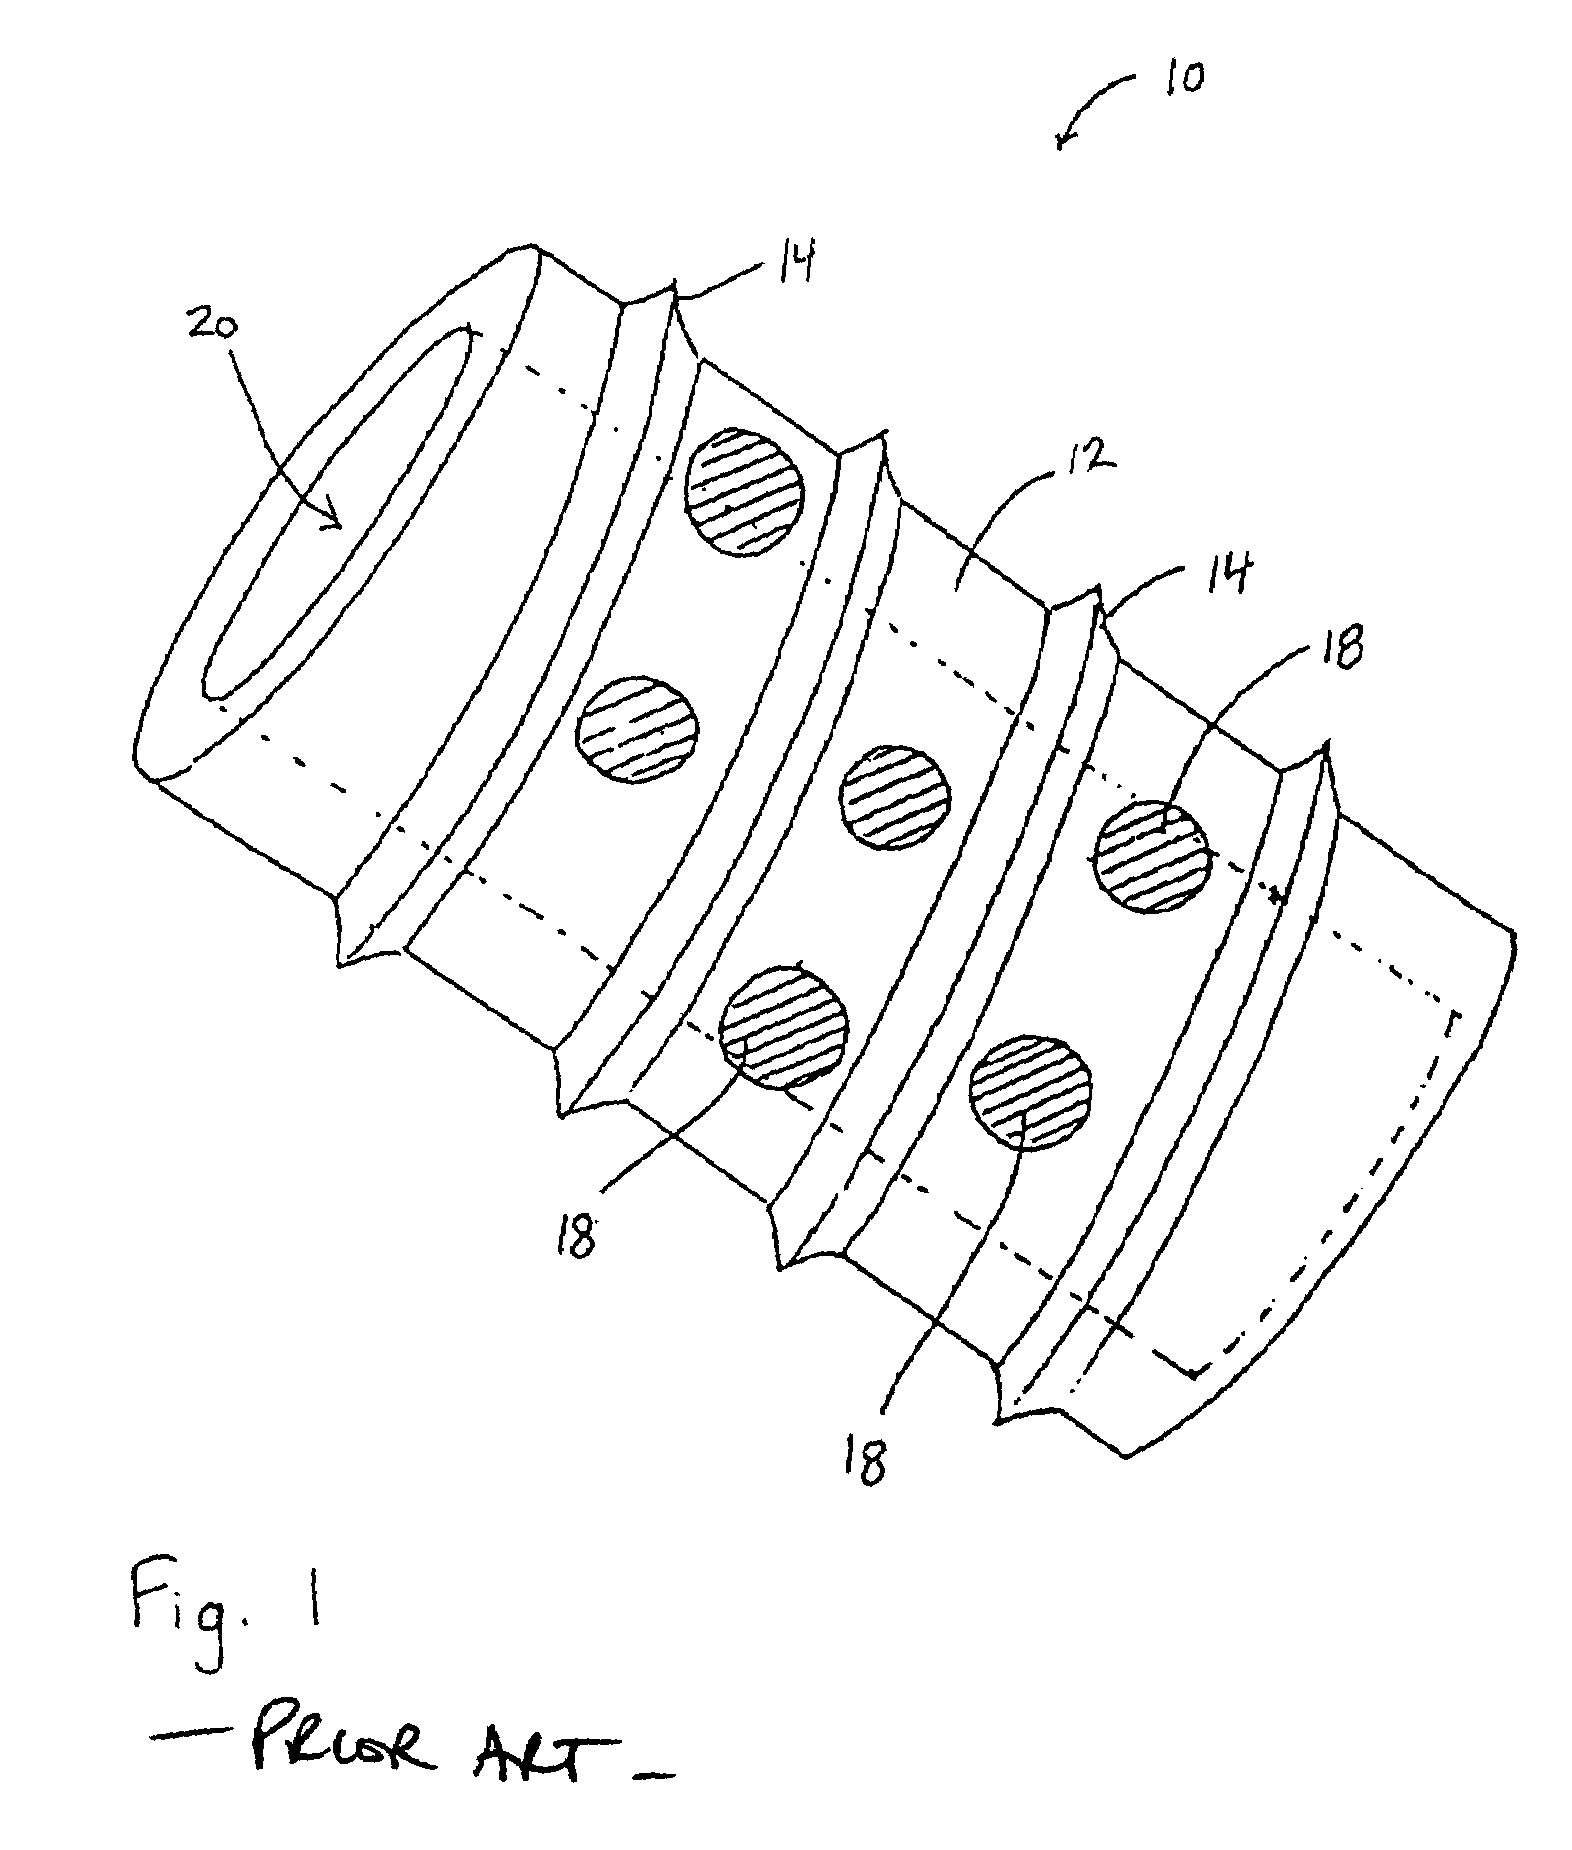 Intervertebral spacer device utilizing a spirally slotted belleville washer having radially spaced concentric grooves